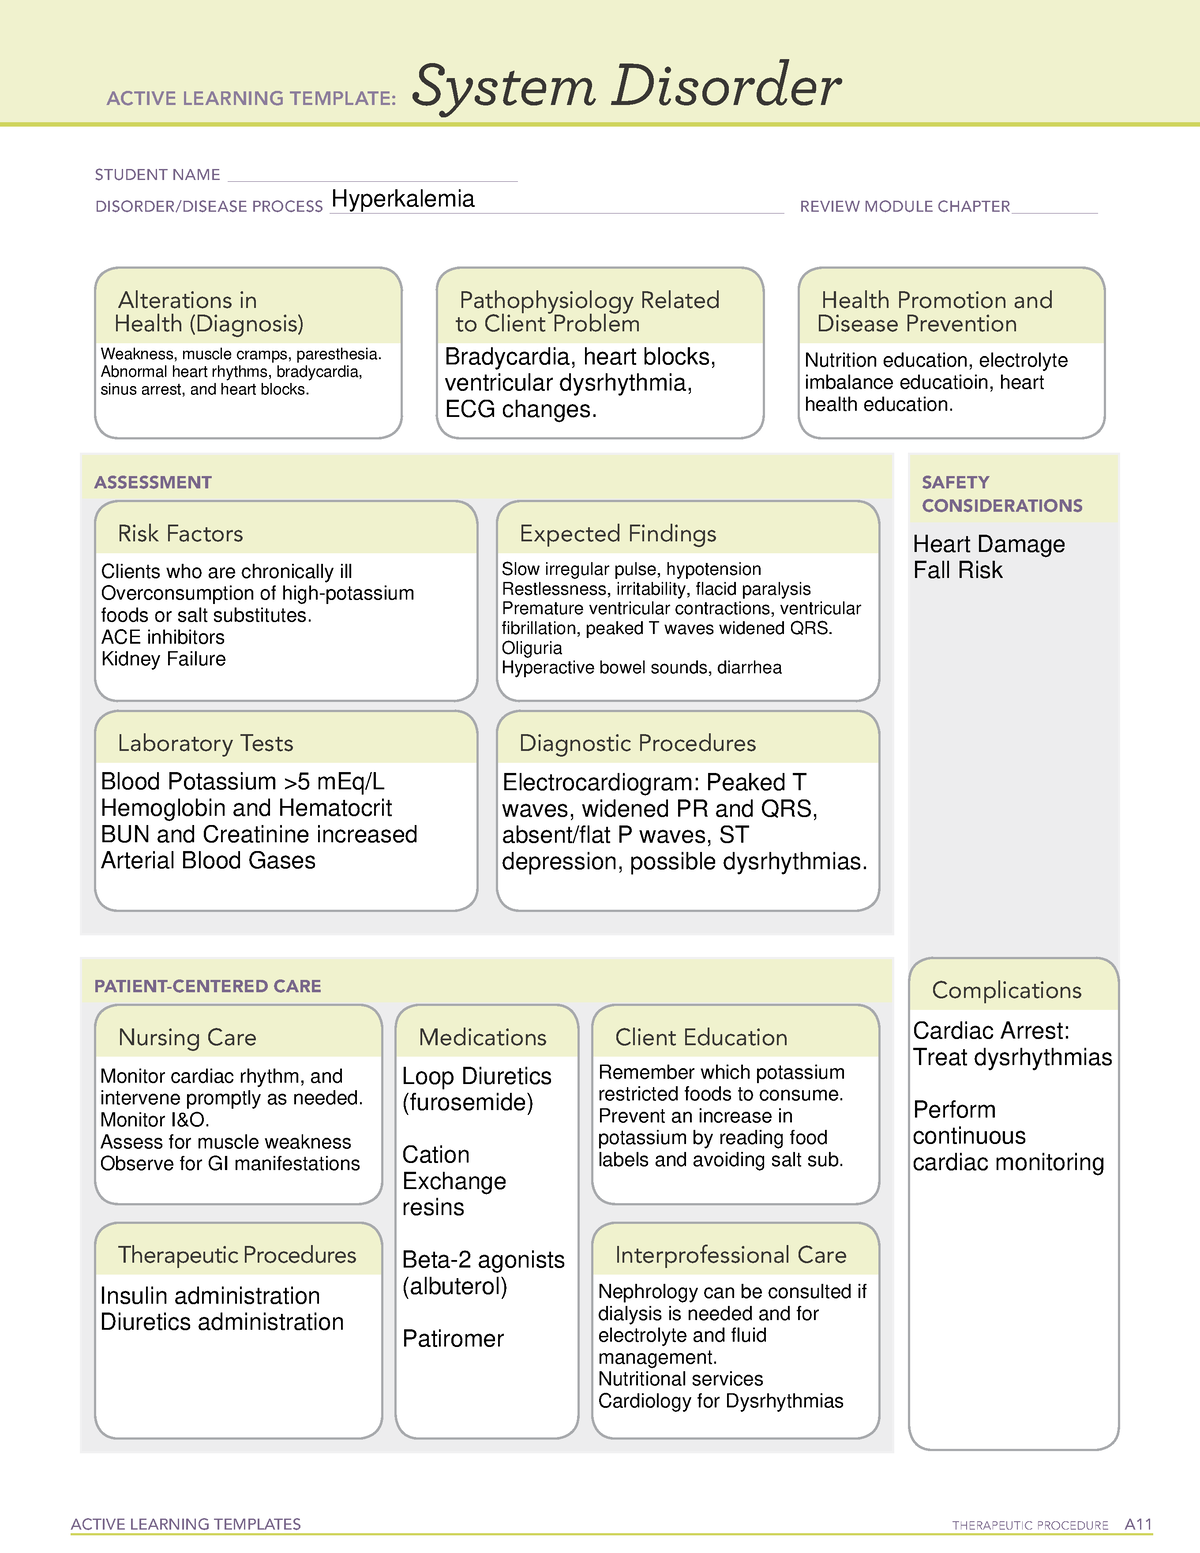 NURS 113C - System Disorder WK2 - ACTIVE LEARNING TEMPLATES THERAPEUTIC ...